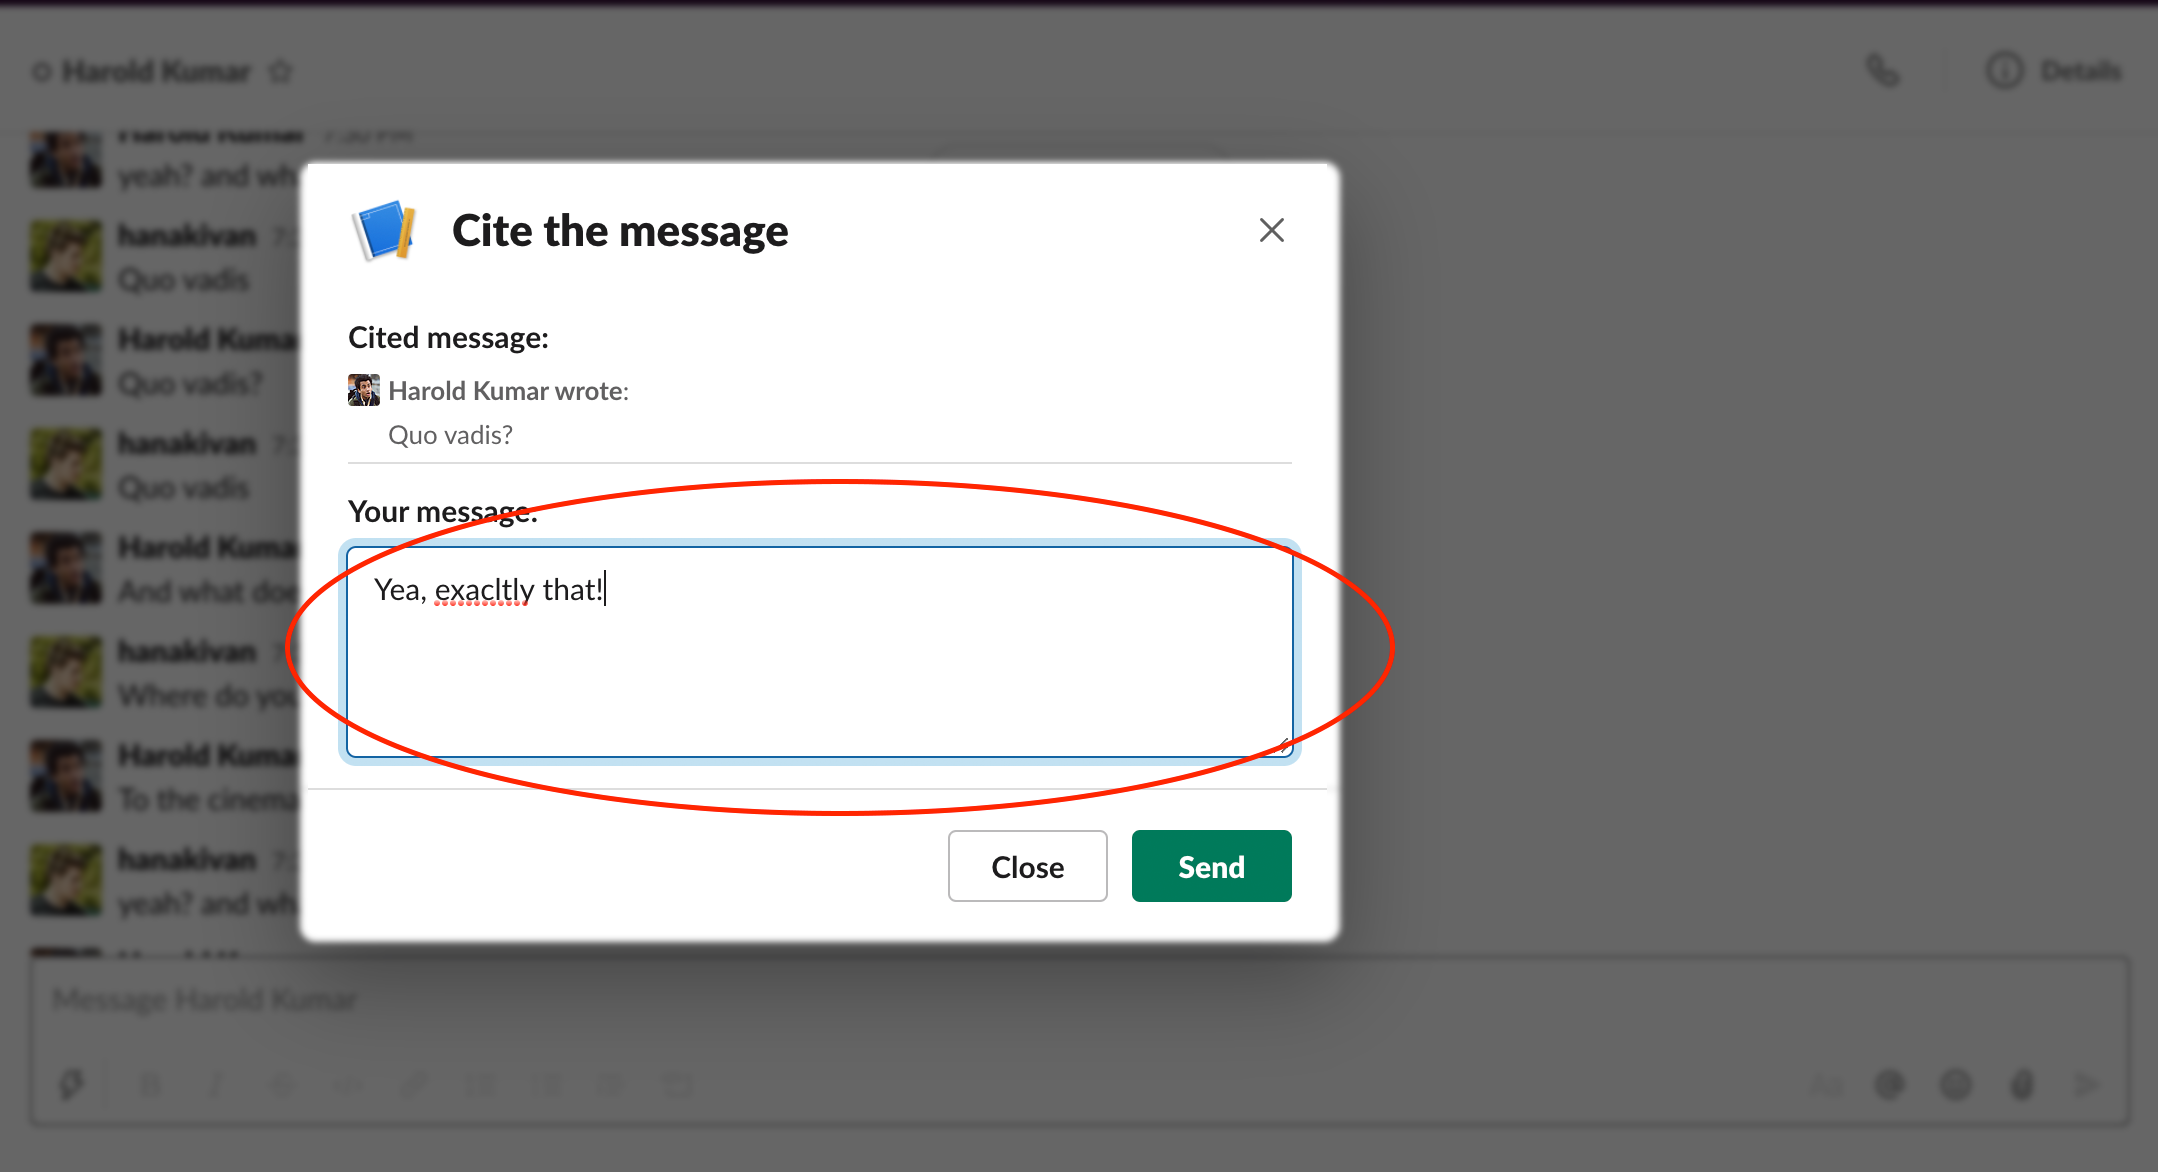 How to send a delayed message in Slack